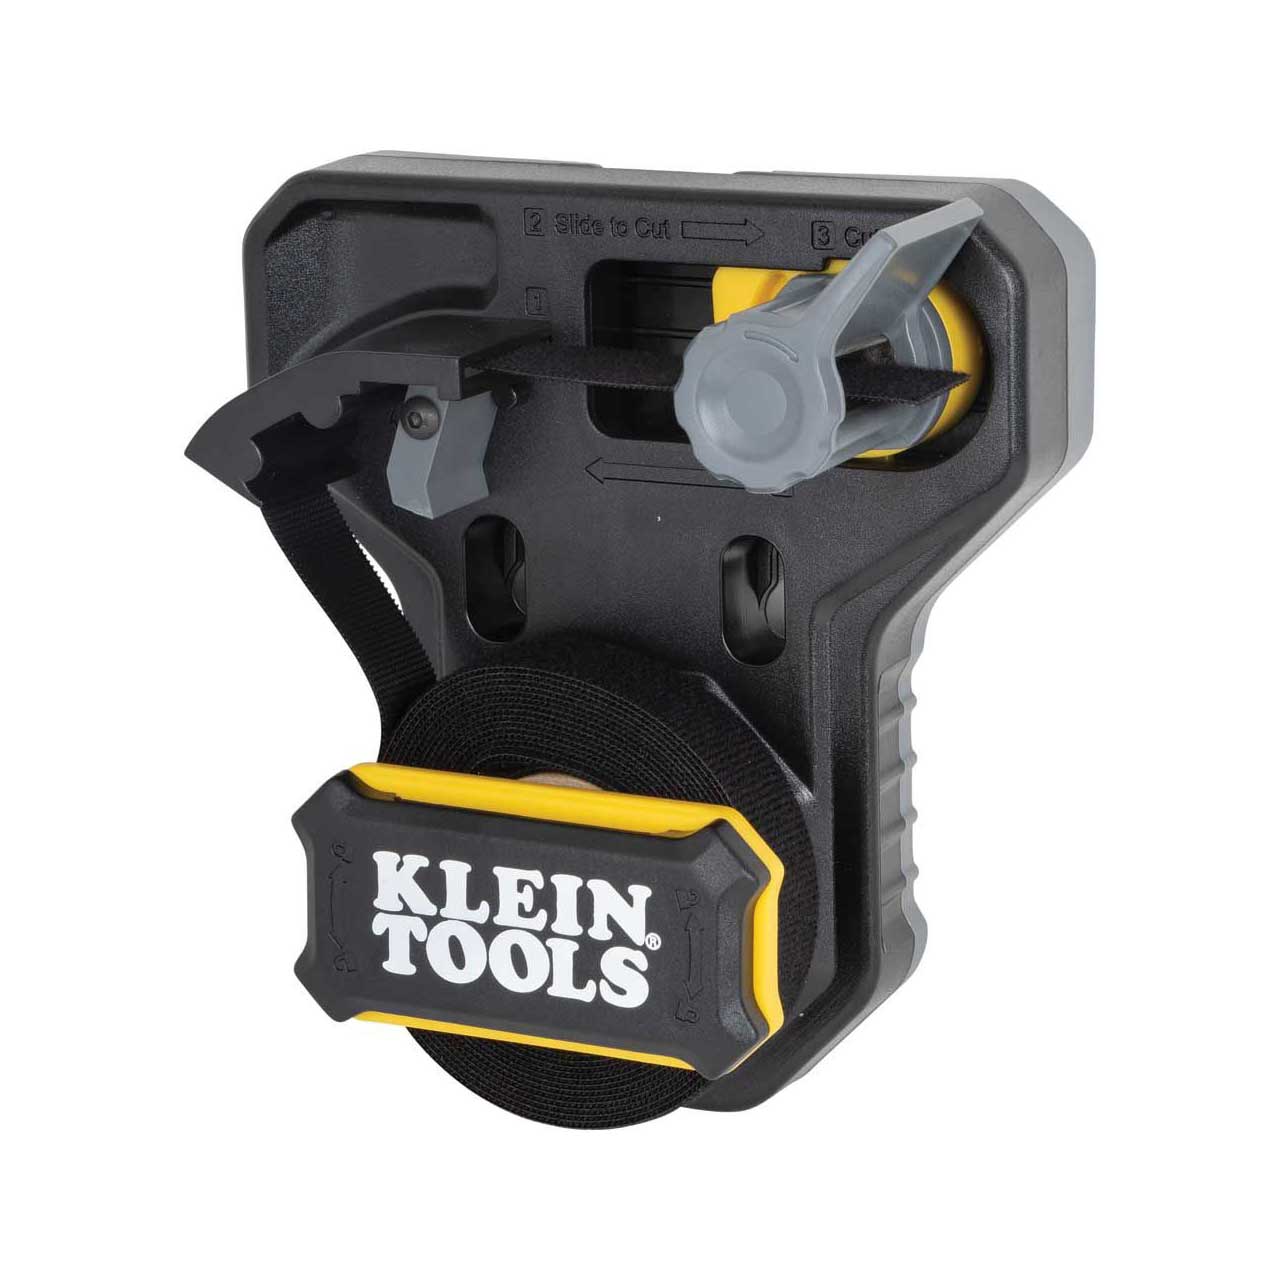 Klein Tools 450-900 Hook and Loop Tape Dispenser for Versatile Cable Ties and Custom Lengths 450-900